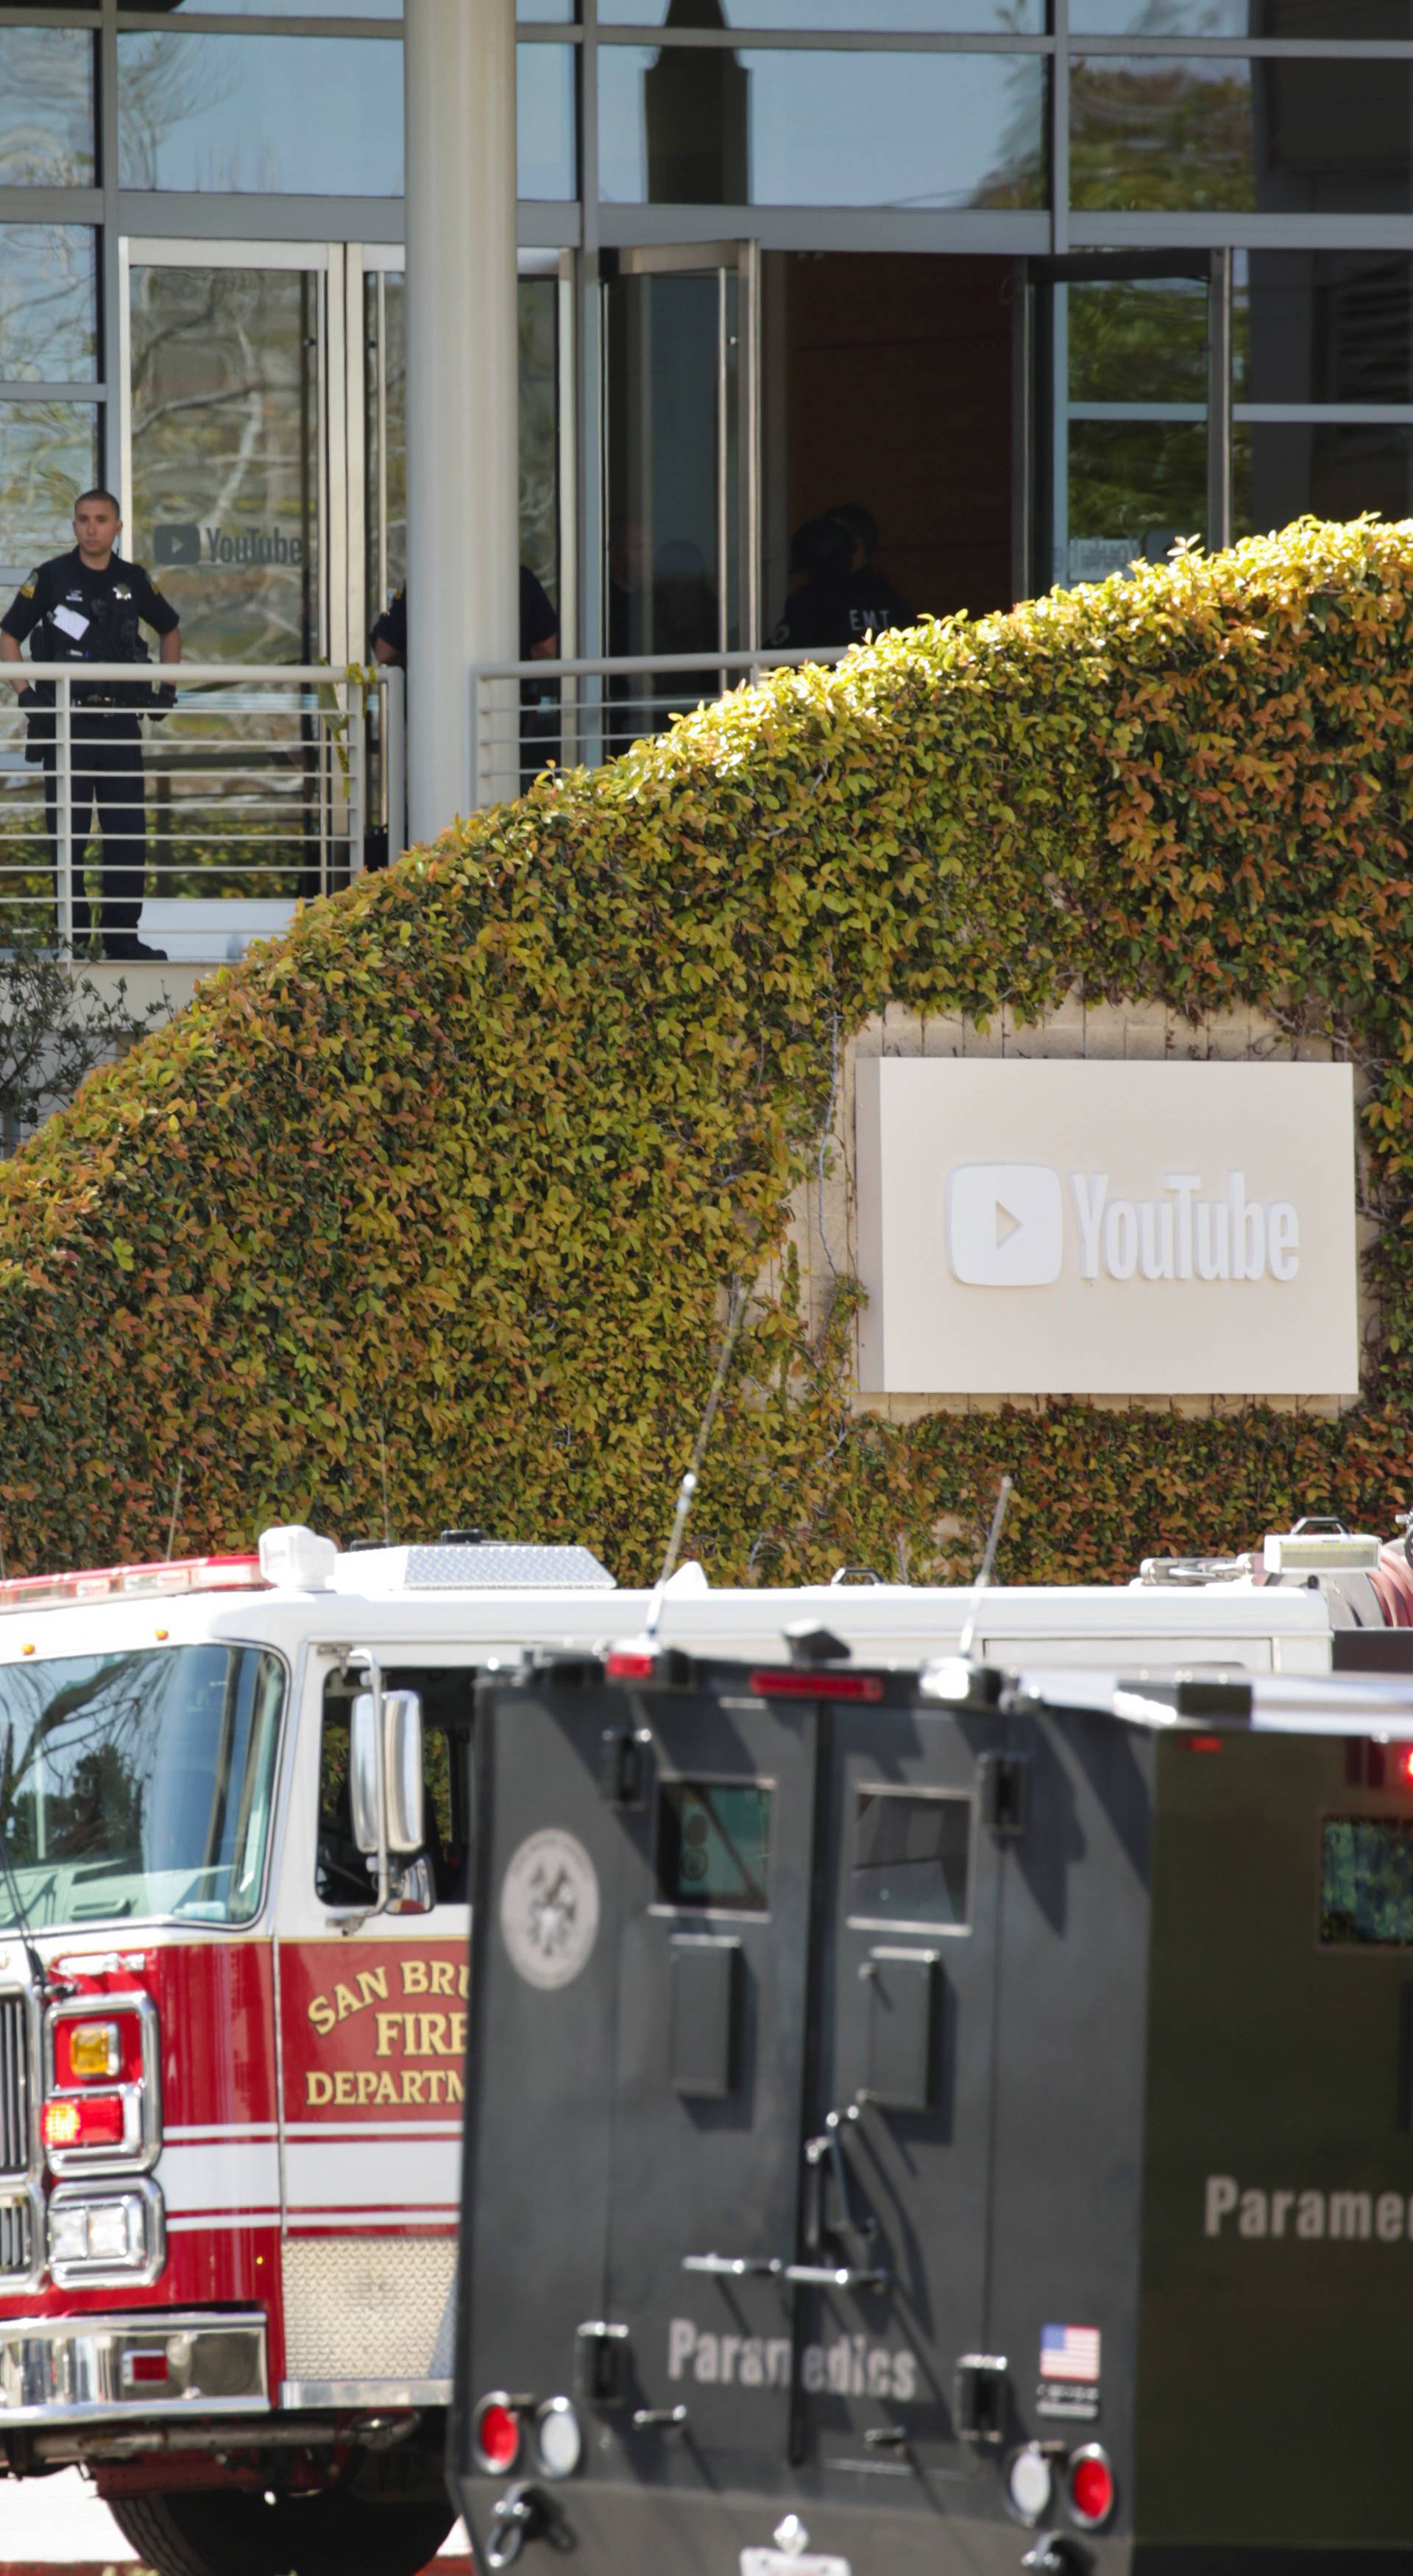 A police officer is seen at Youtube headquarters following an active shooter situation in San Bruno, California